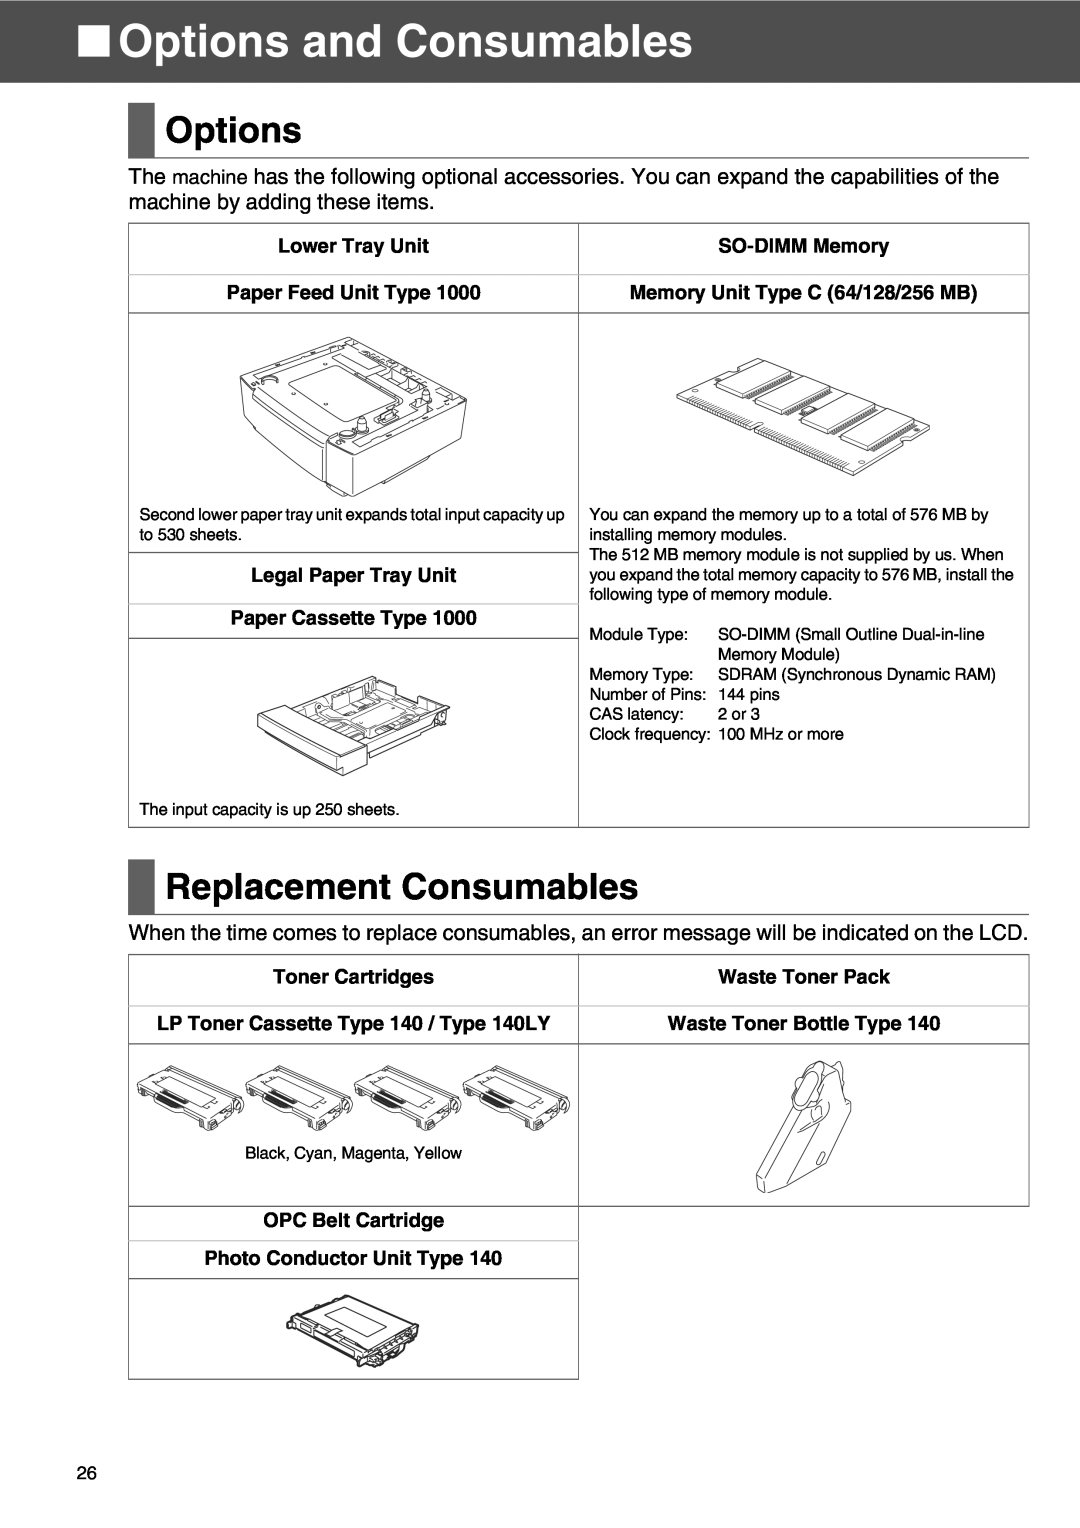 Microsoft SPC210SF setup guide Options and Consumables, Replacement Consumables 